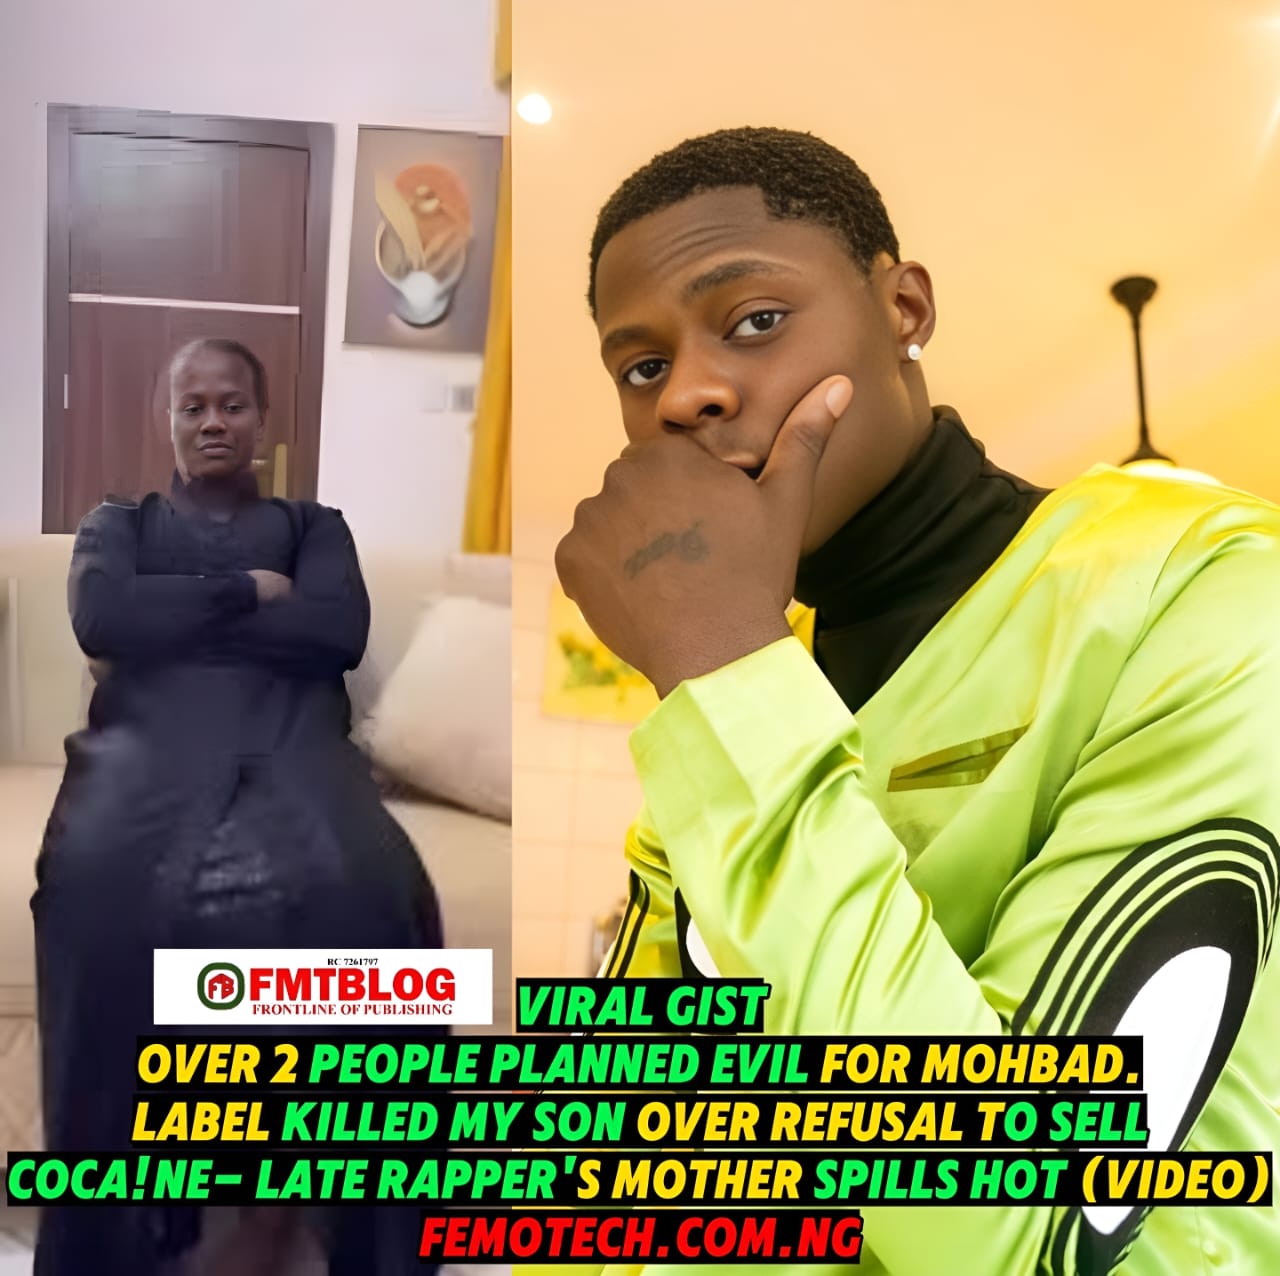 Over 3 People Planned Evil For Mohbad. Label Killed My Son Over Refusal To Sell Coca!ne- Late Rapper’s Mother Spills Hot (VIDEO)